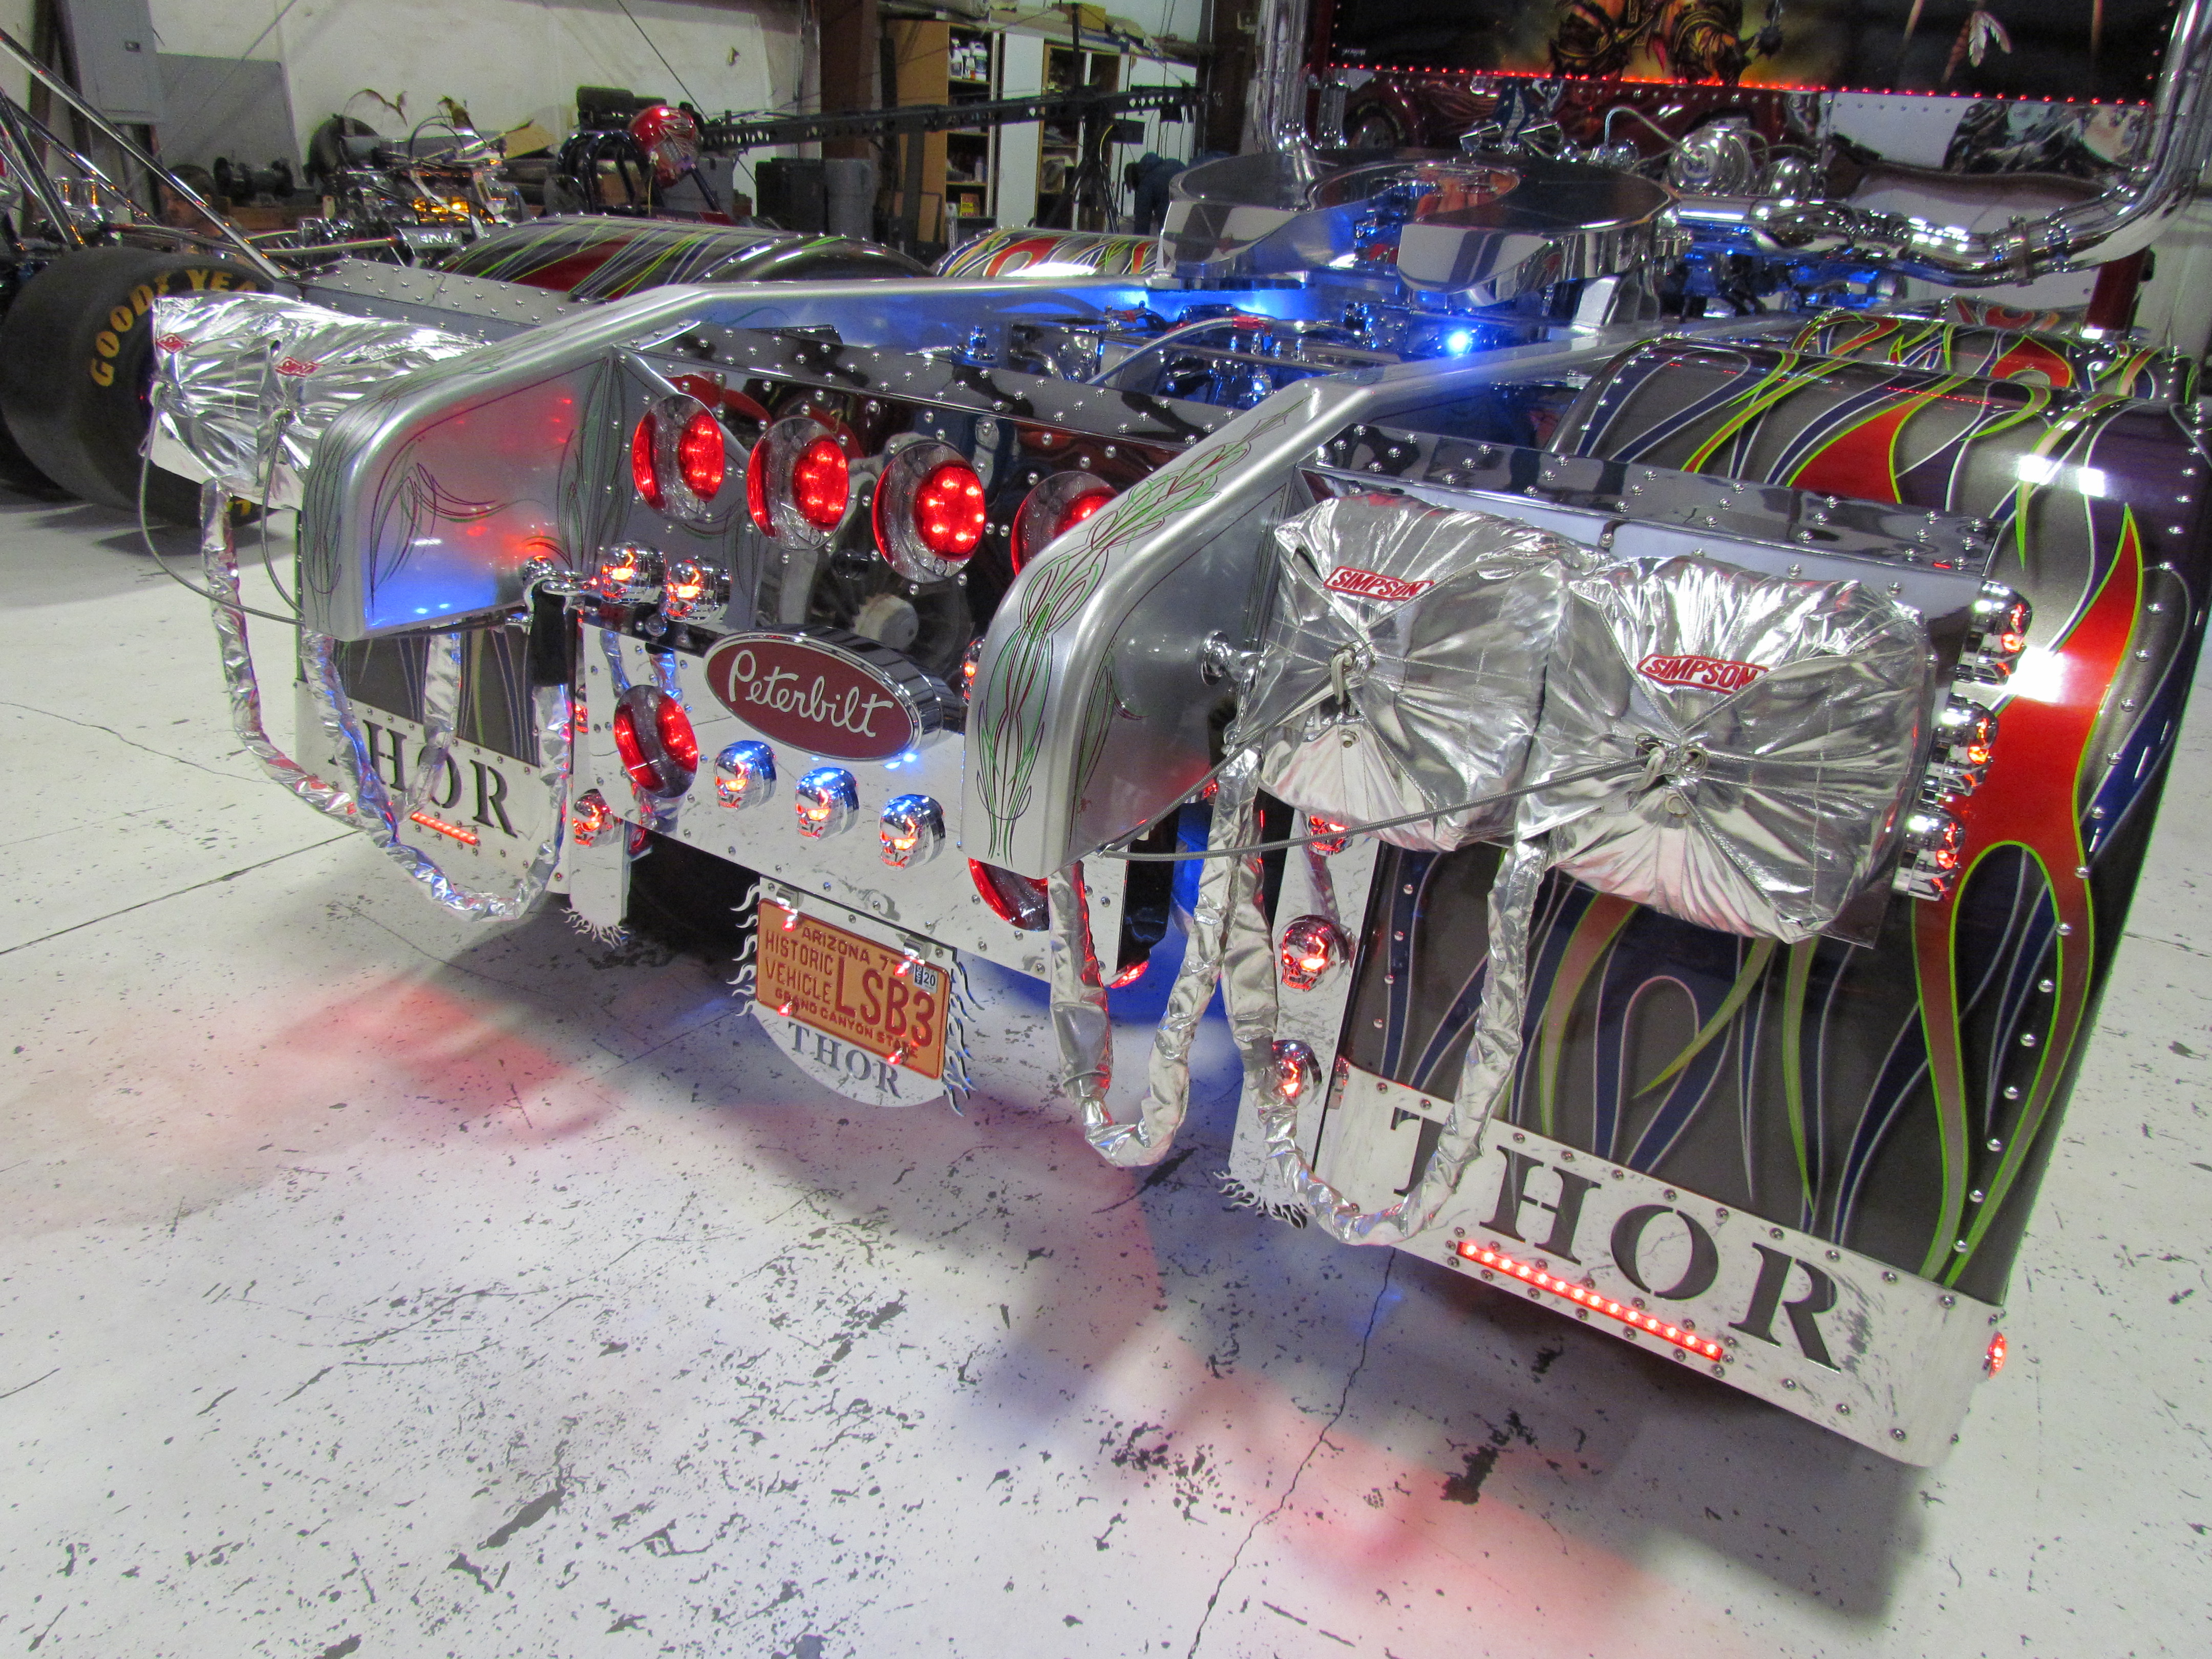 Thor truck, This Thor is the superhero of big rigs, ClassicCars.com Journal